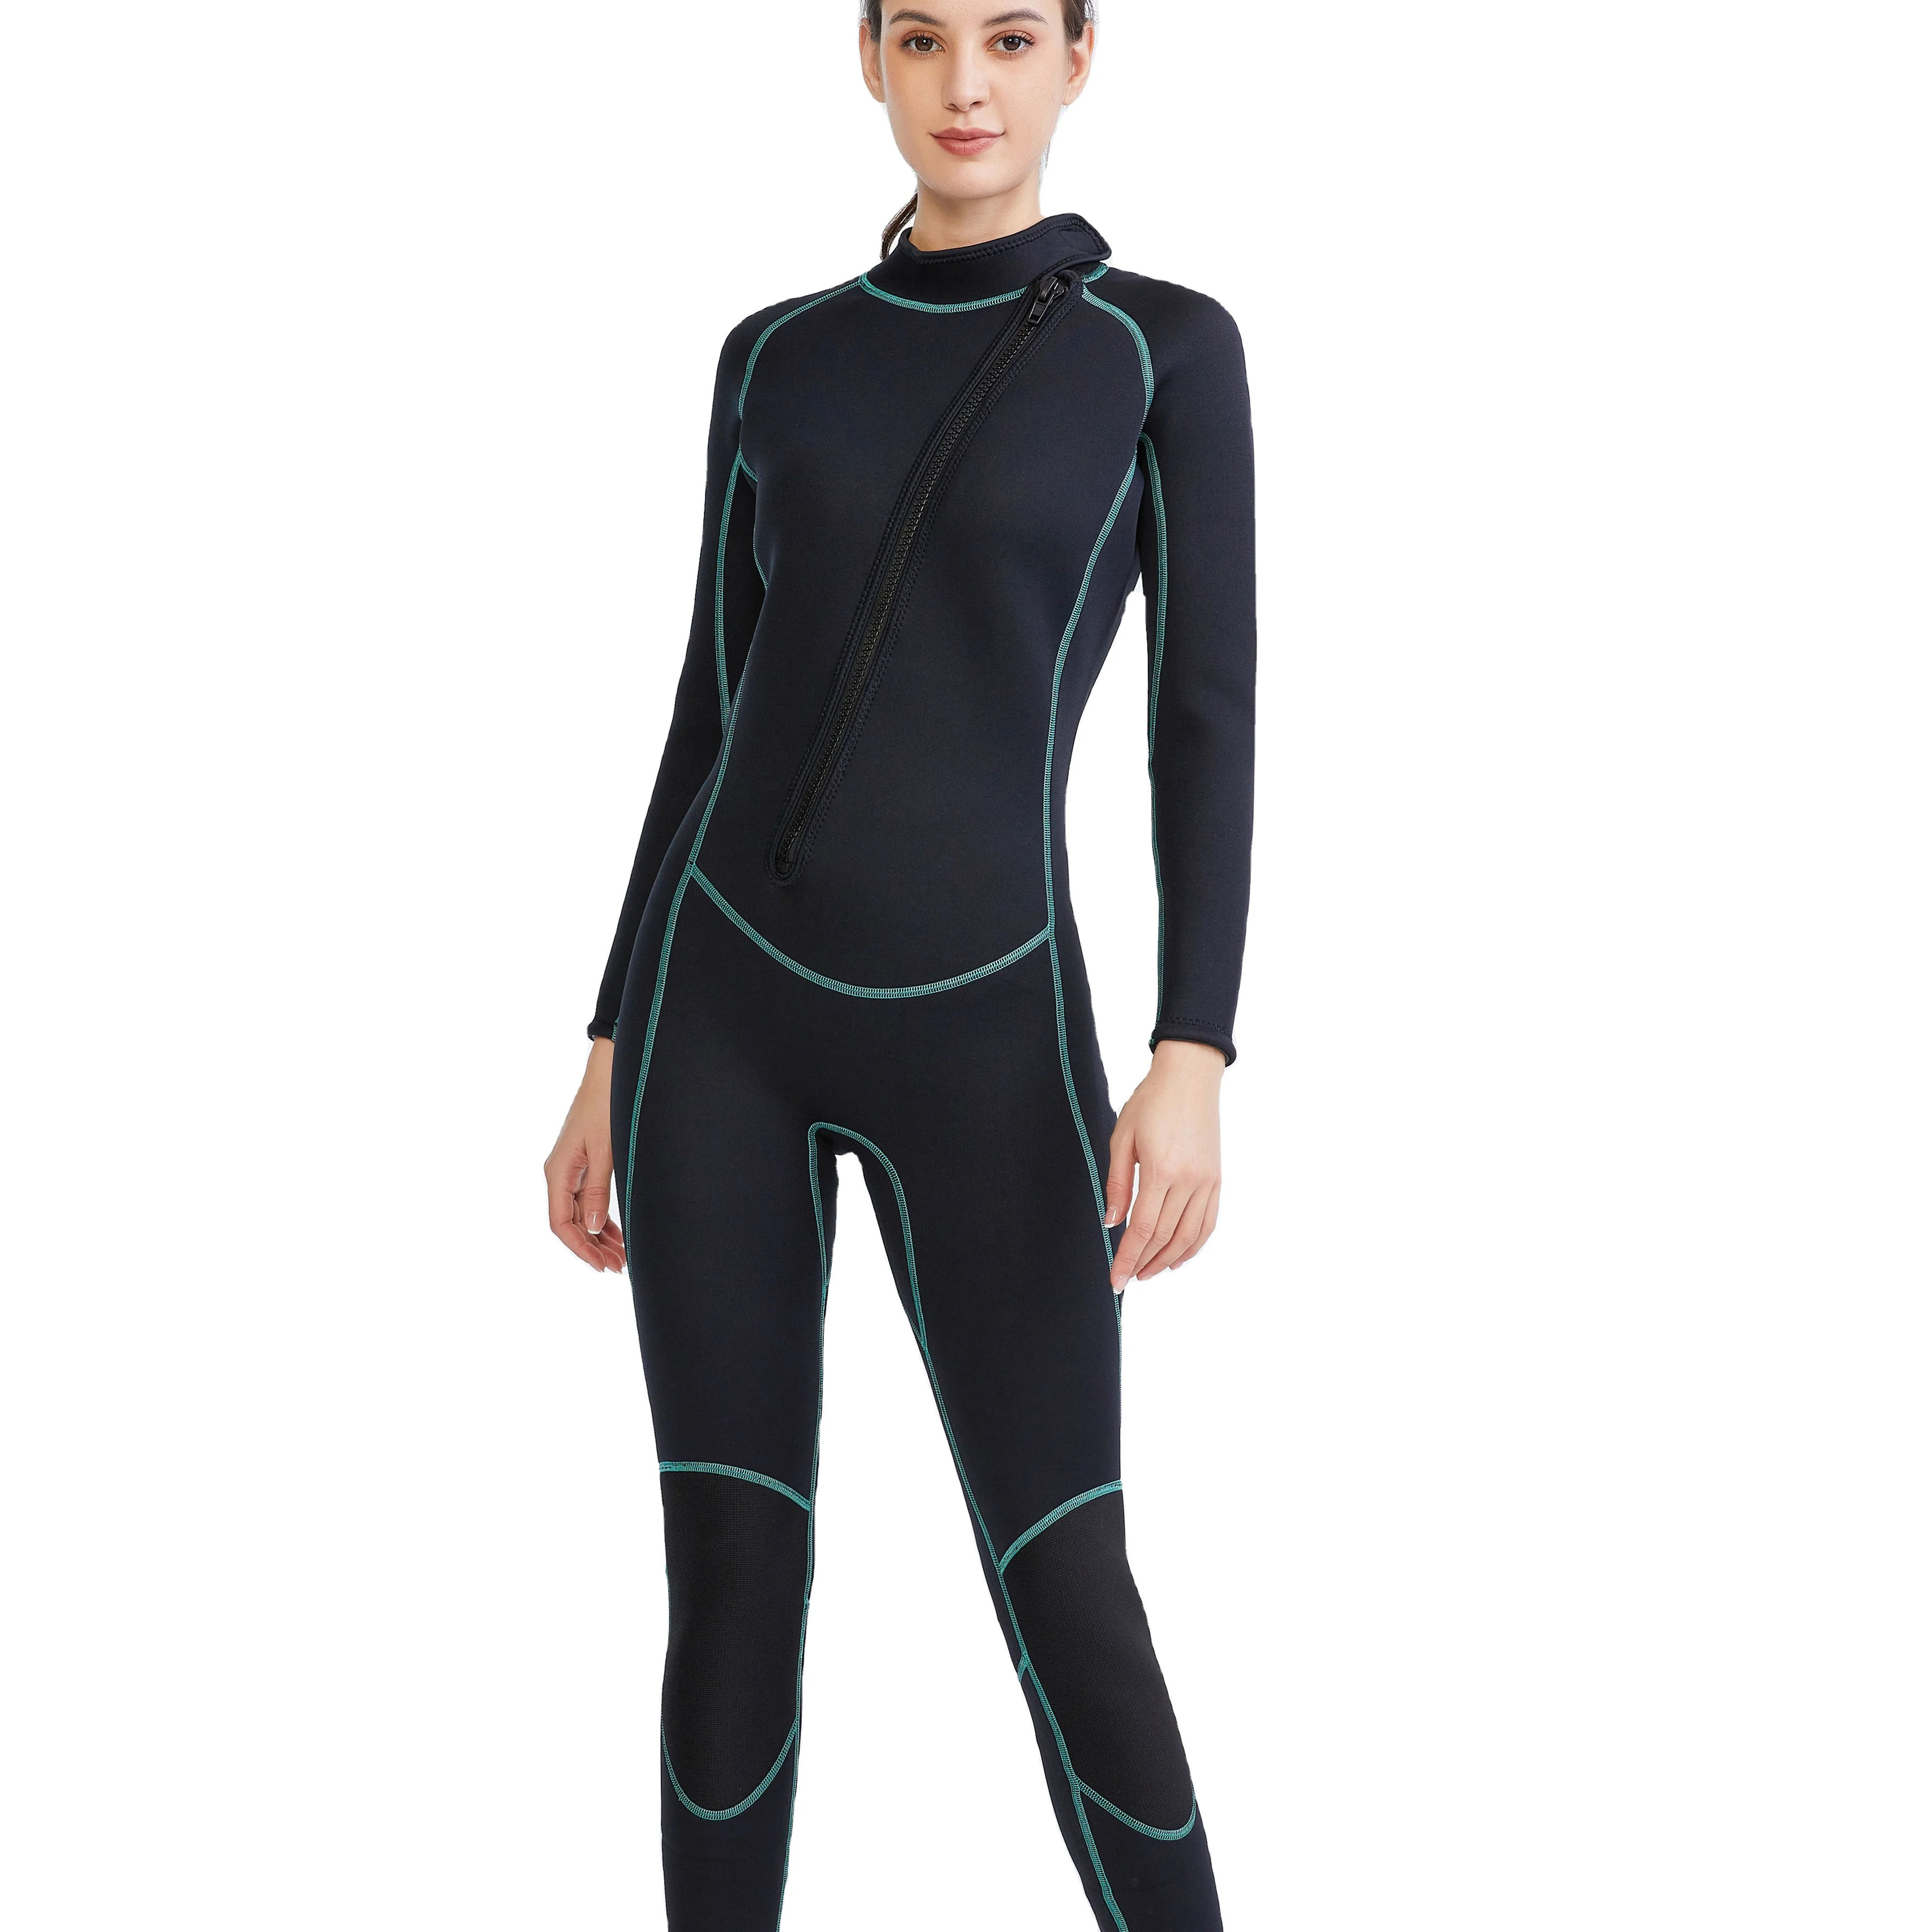 

Low MOQ Neoprene 3mm Wet Suit with Chest Zipper for Women with High Quality, Black